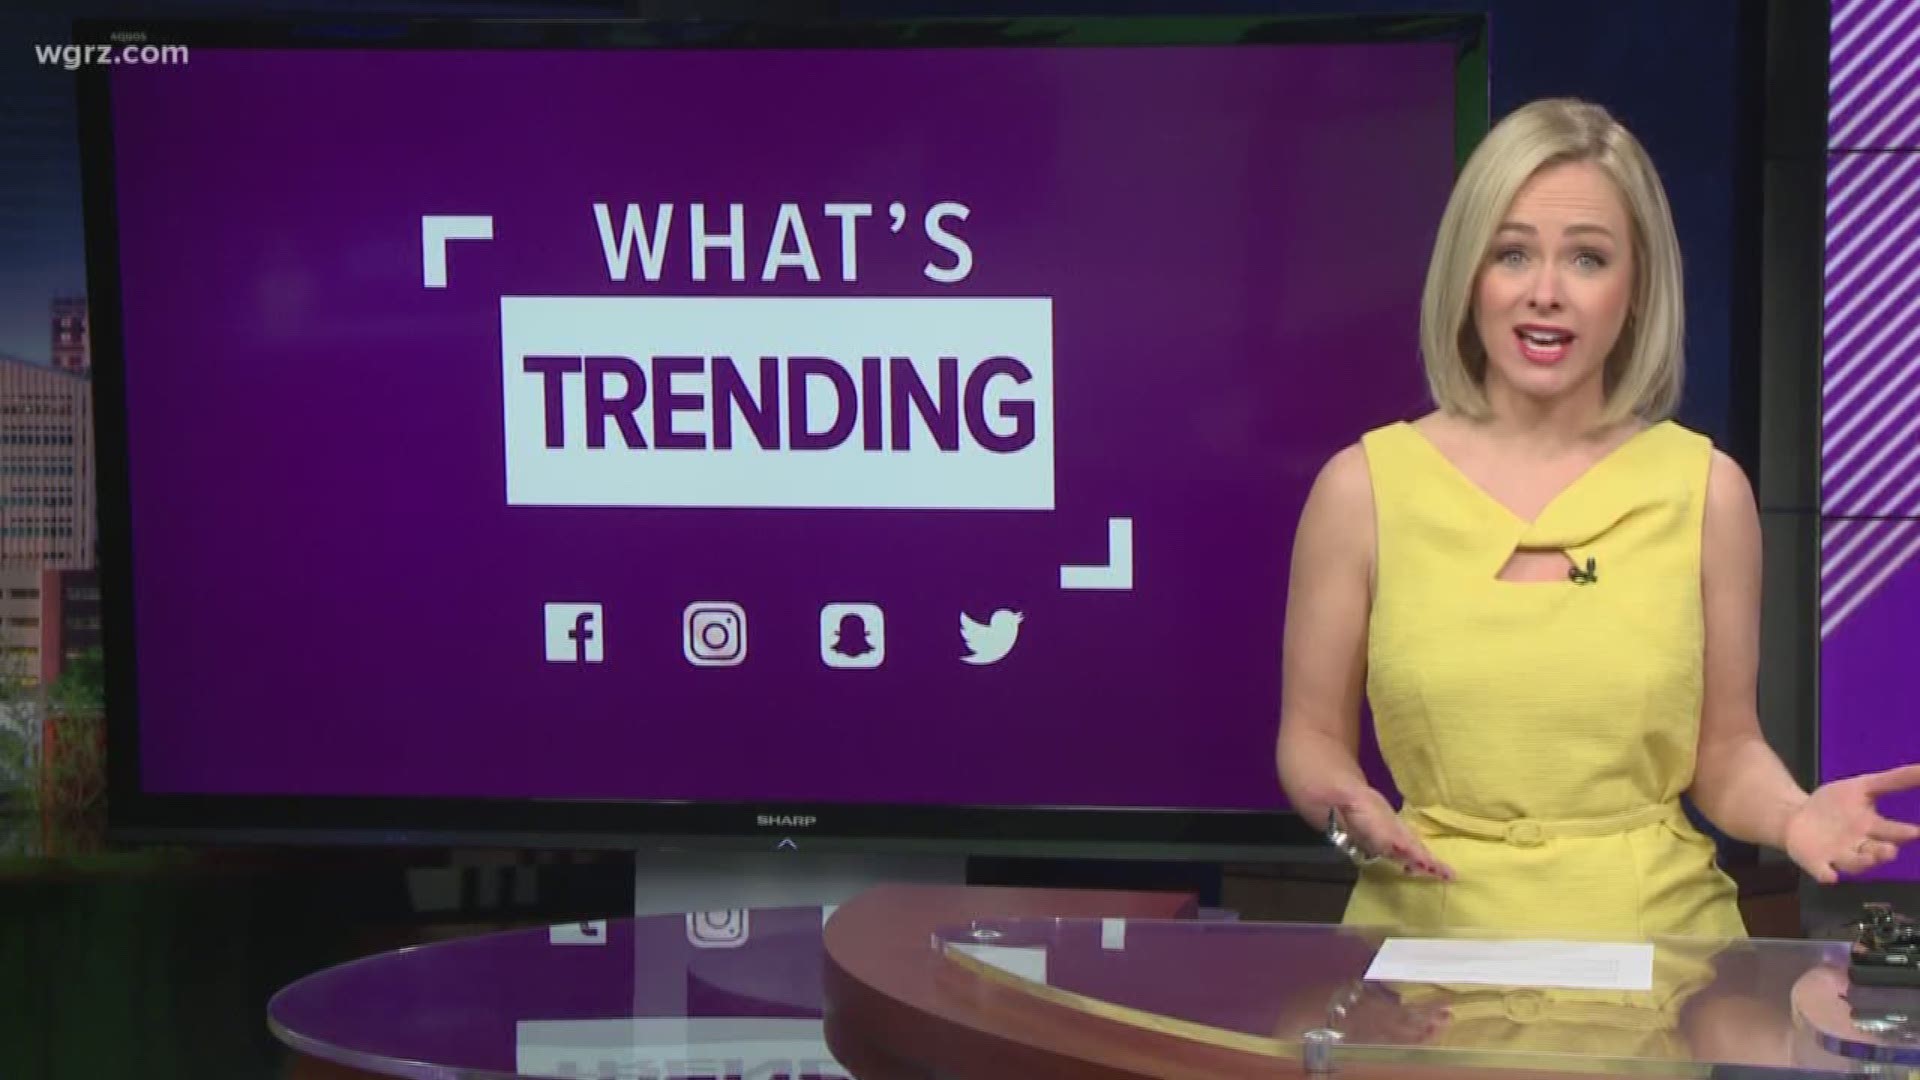 A bus in Buffalo is trending on Reddit for a totally hilarious reason and a viral video is being called a great big fake. Here's What's Trending for April 26, 2018.